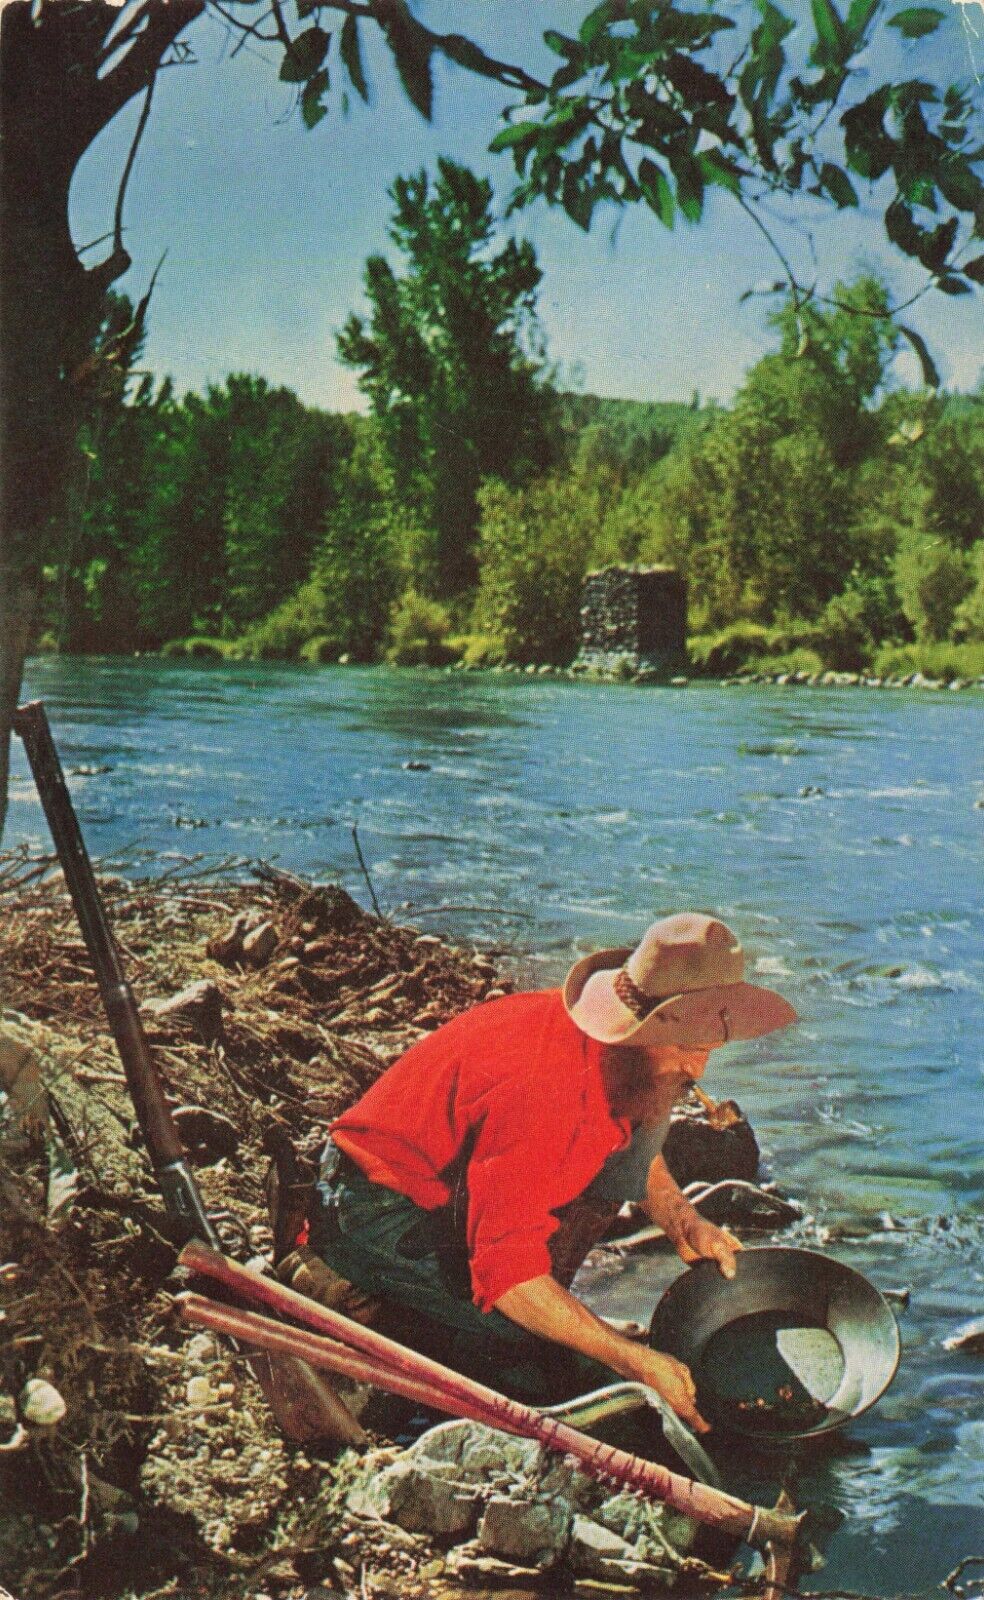 Postcard CA Pioneer Gold Prospector Mother Lode Country Stream River 49ers